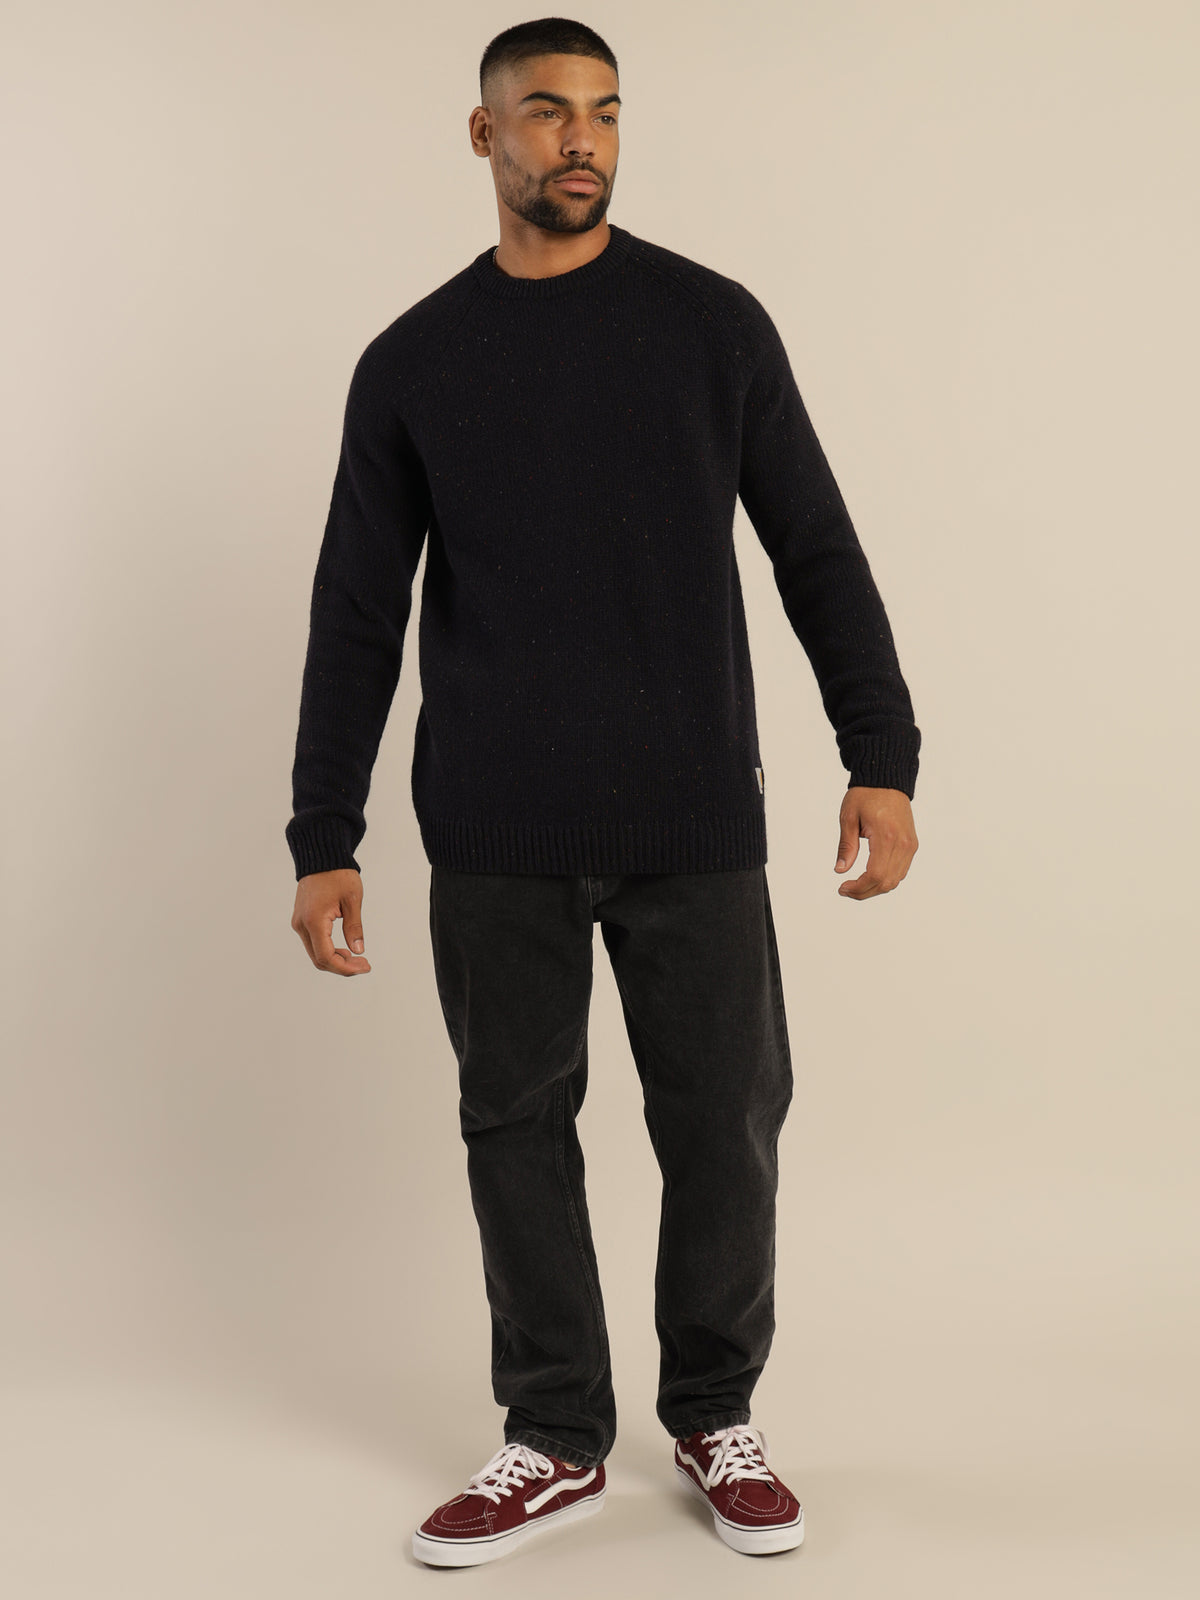 Anglistic Sweater in Speckled Dark Navy